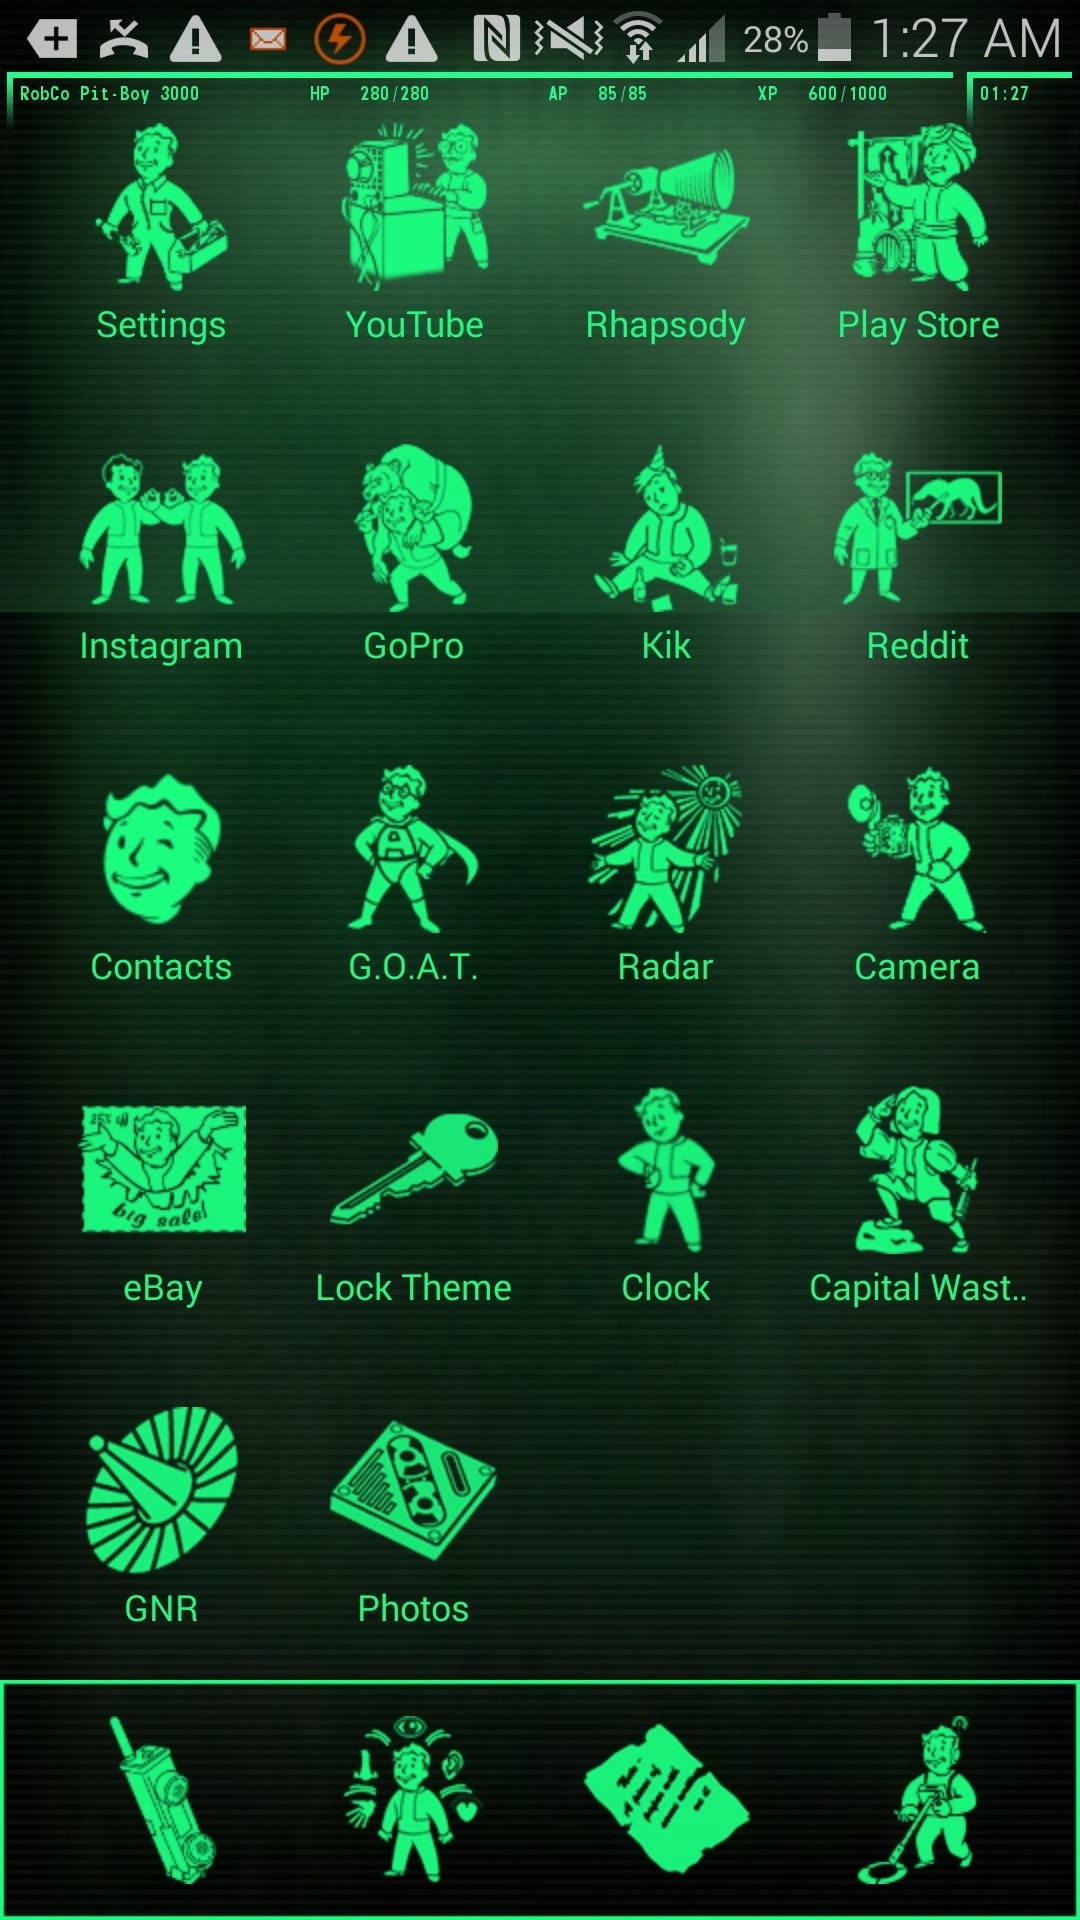 1080x1920 Search Results for “pip boy 3000 wallpaper” – Adorable Wallpapers